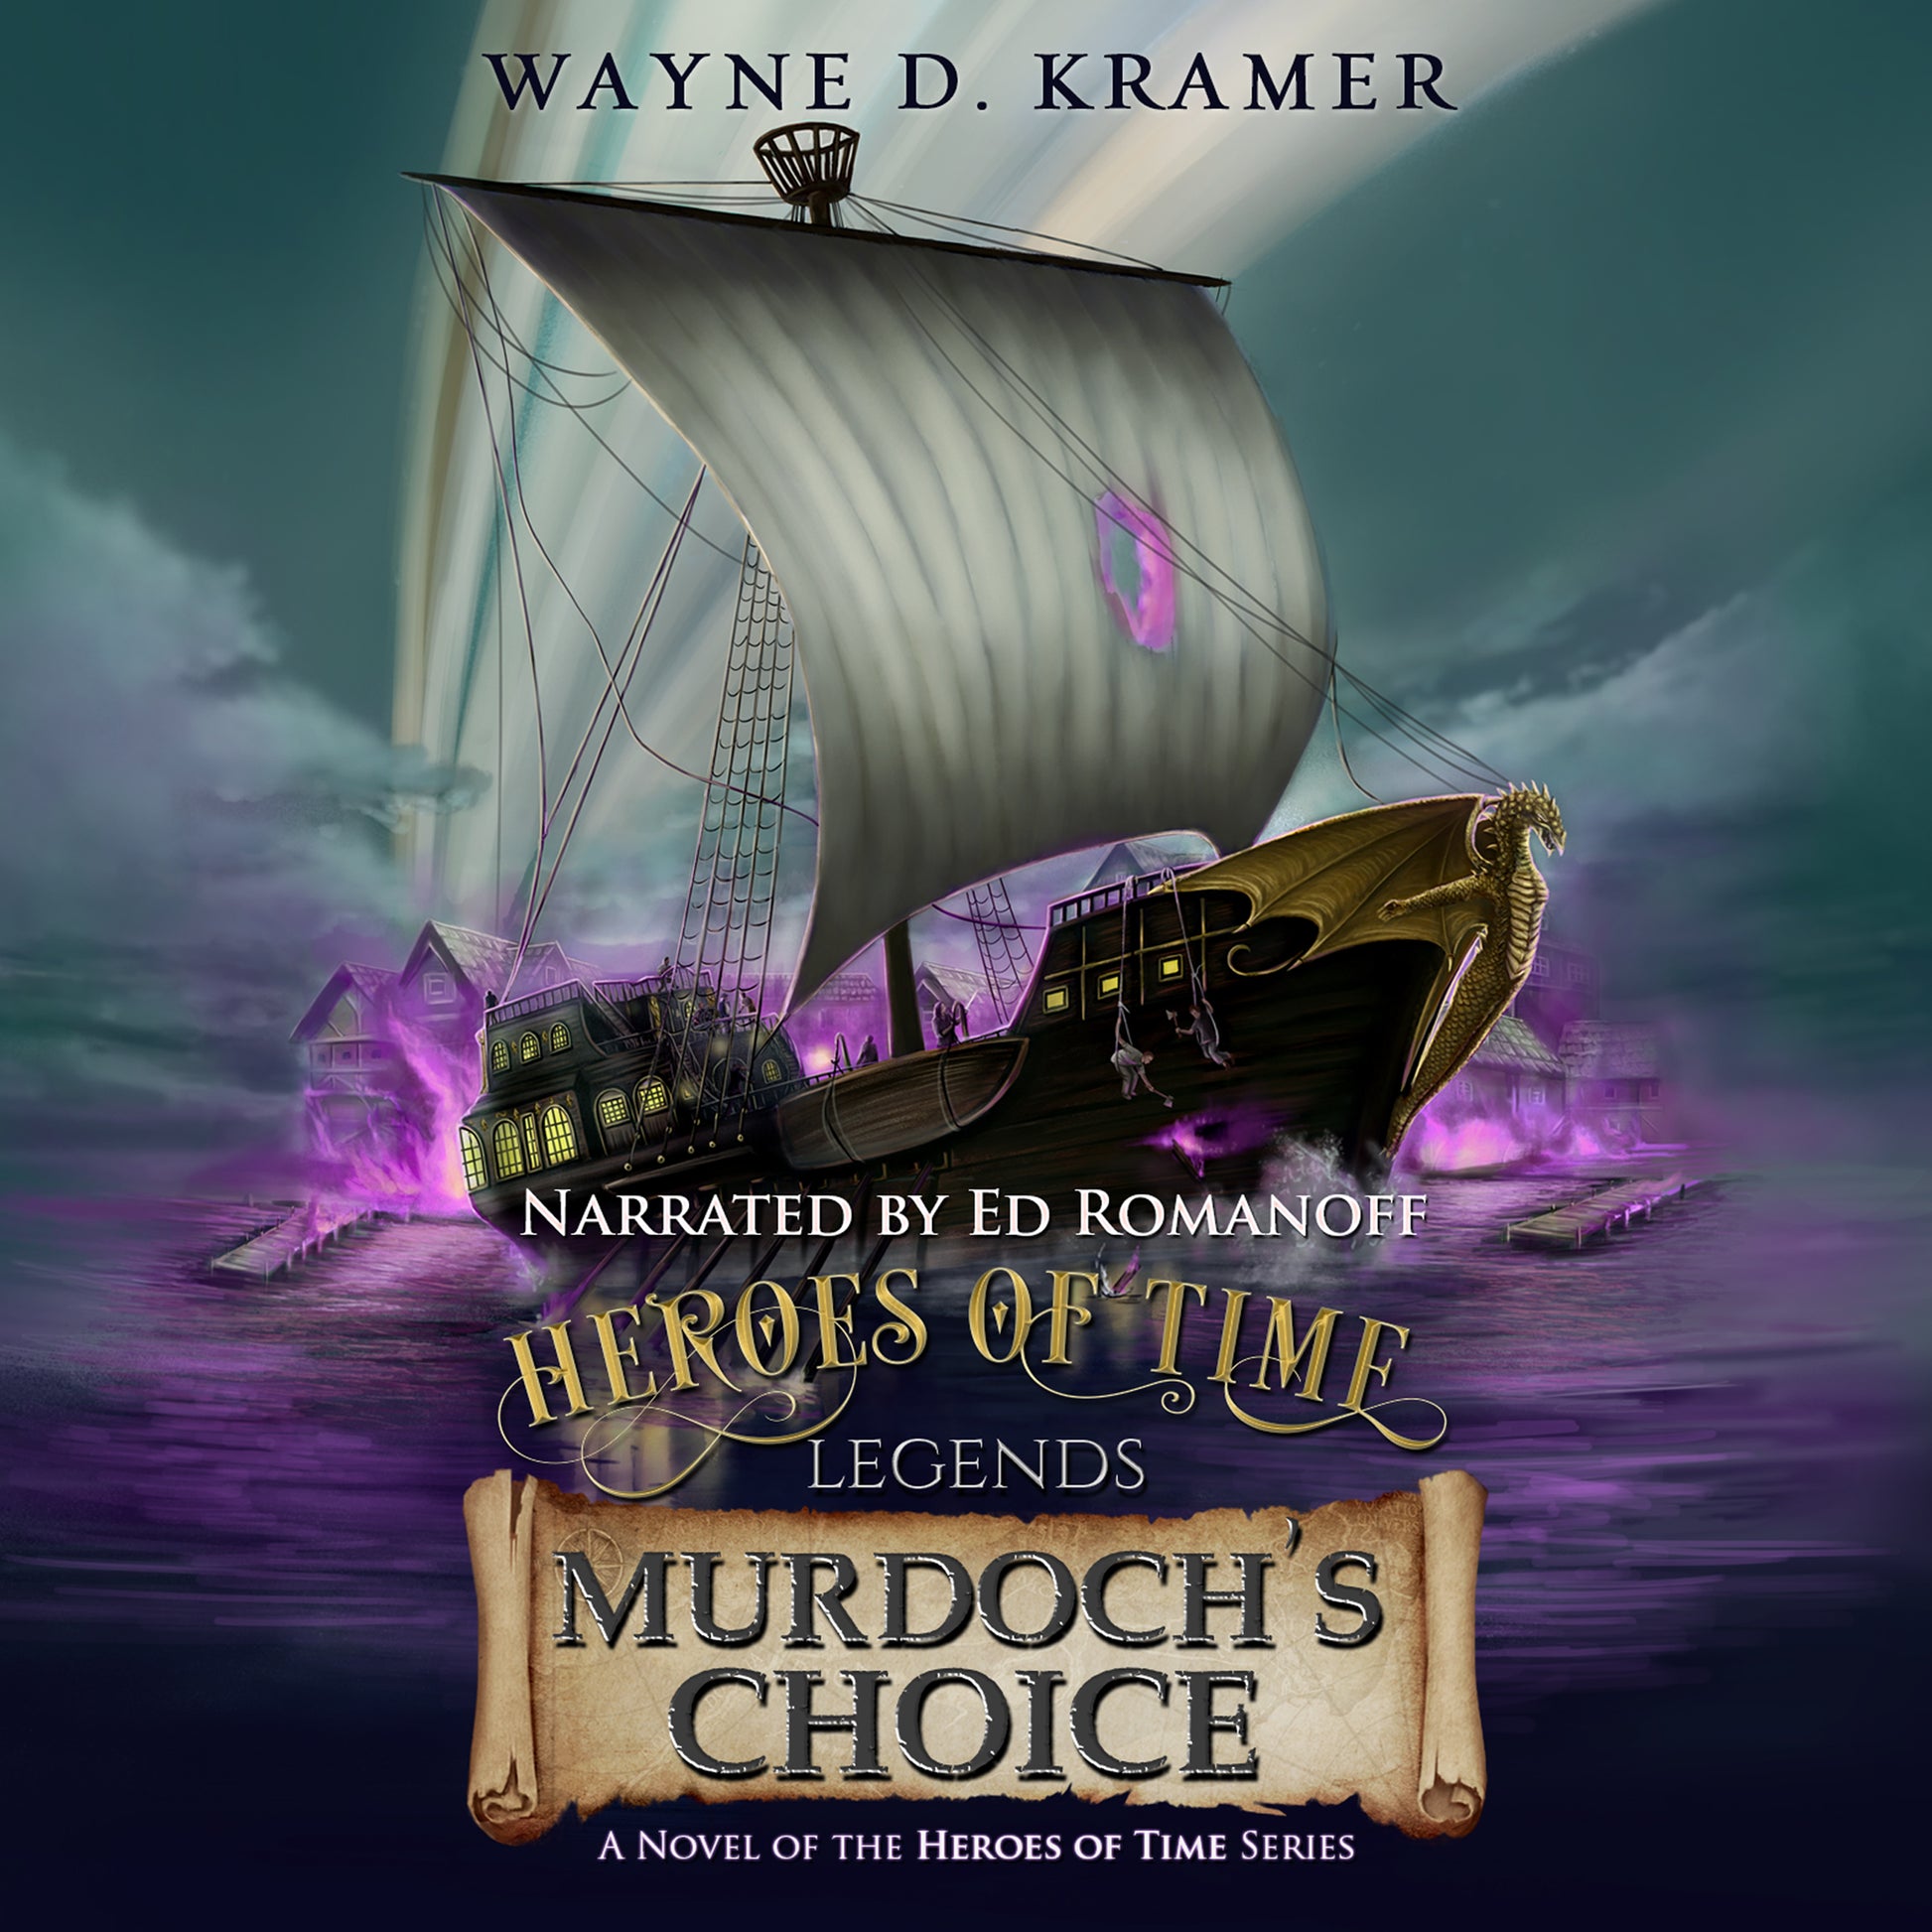 Audiobook CD Set front cover of Murdoch's Choice by author Wayne D. Kramer